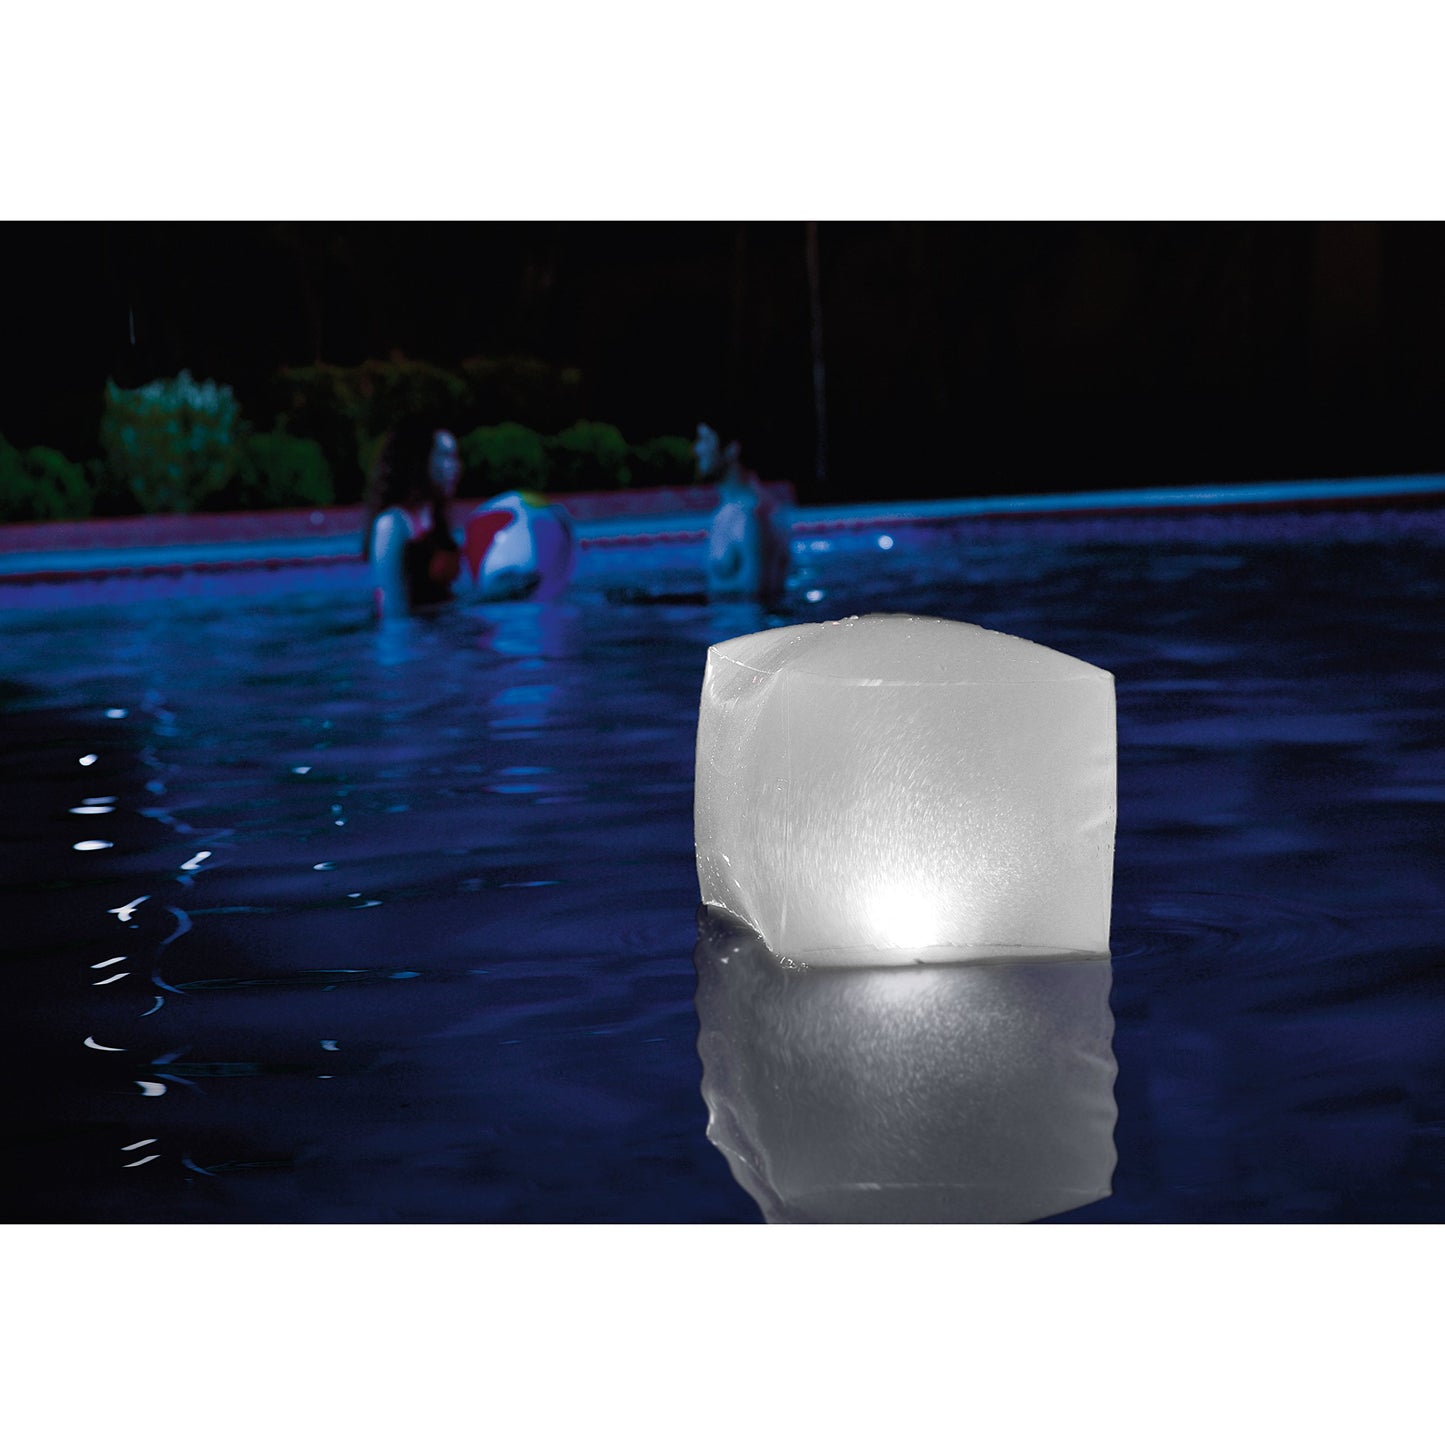 Intex Floating LED Inflatable Cube Light with Multi-Color Illumination, Battery Powered